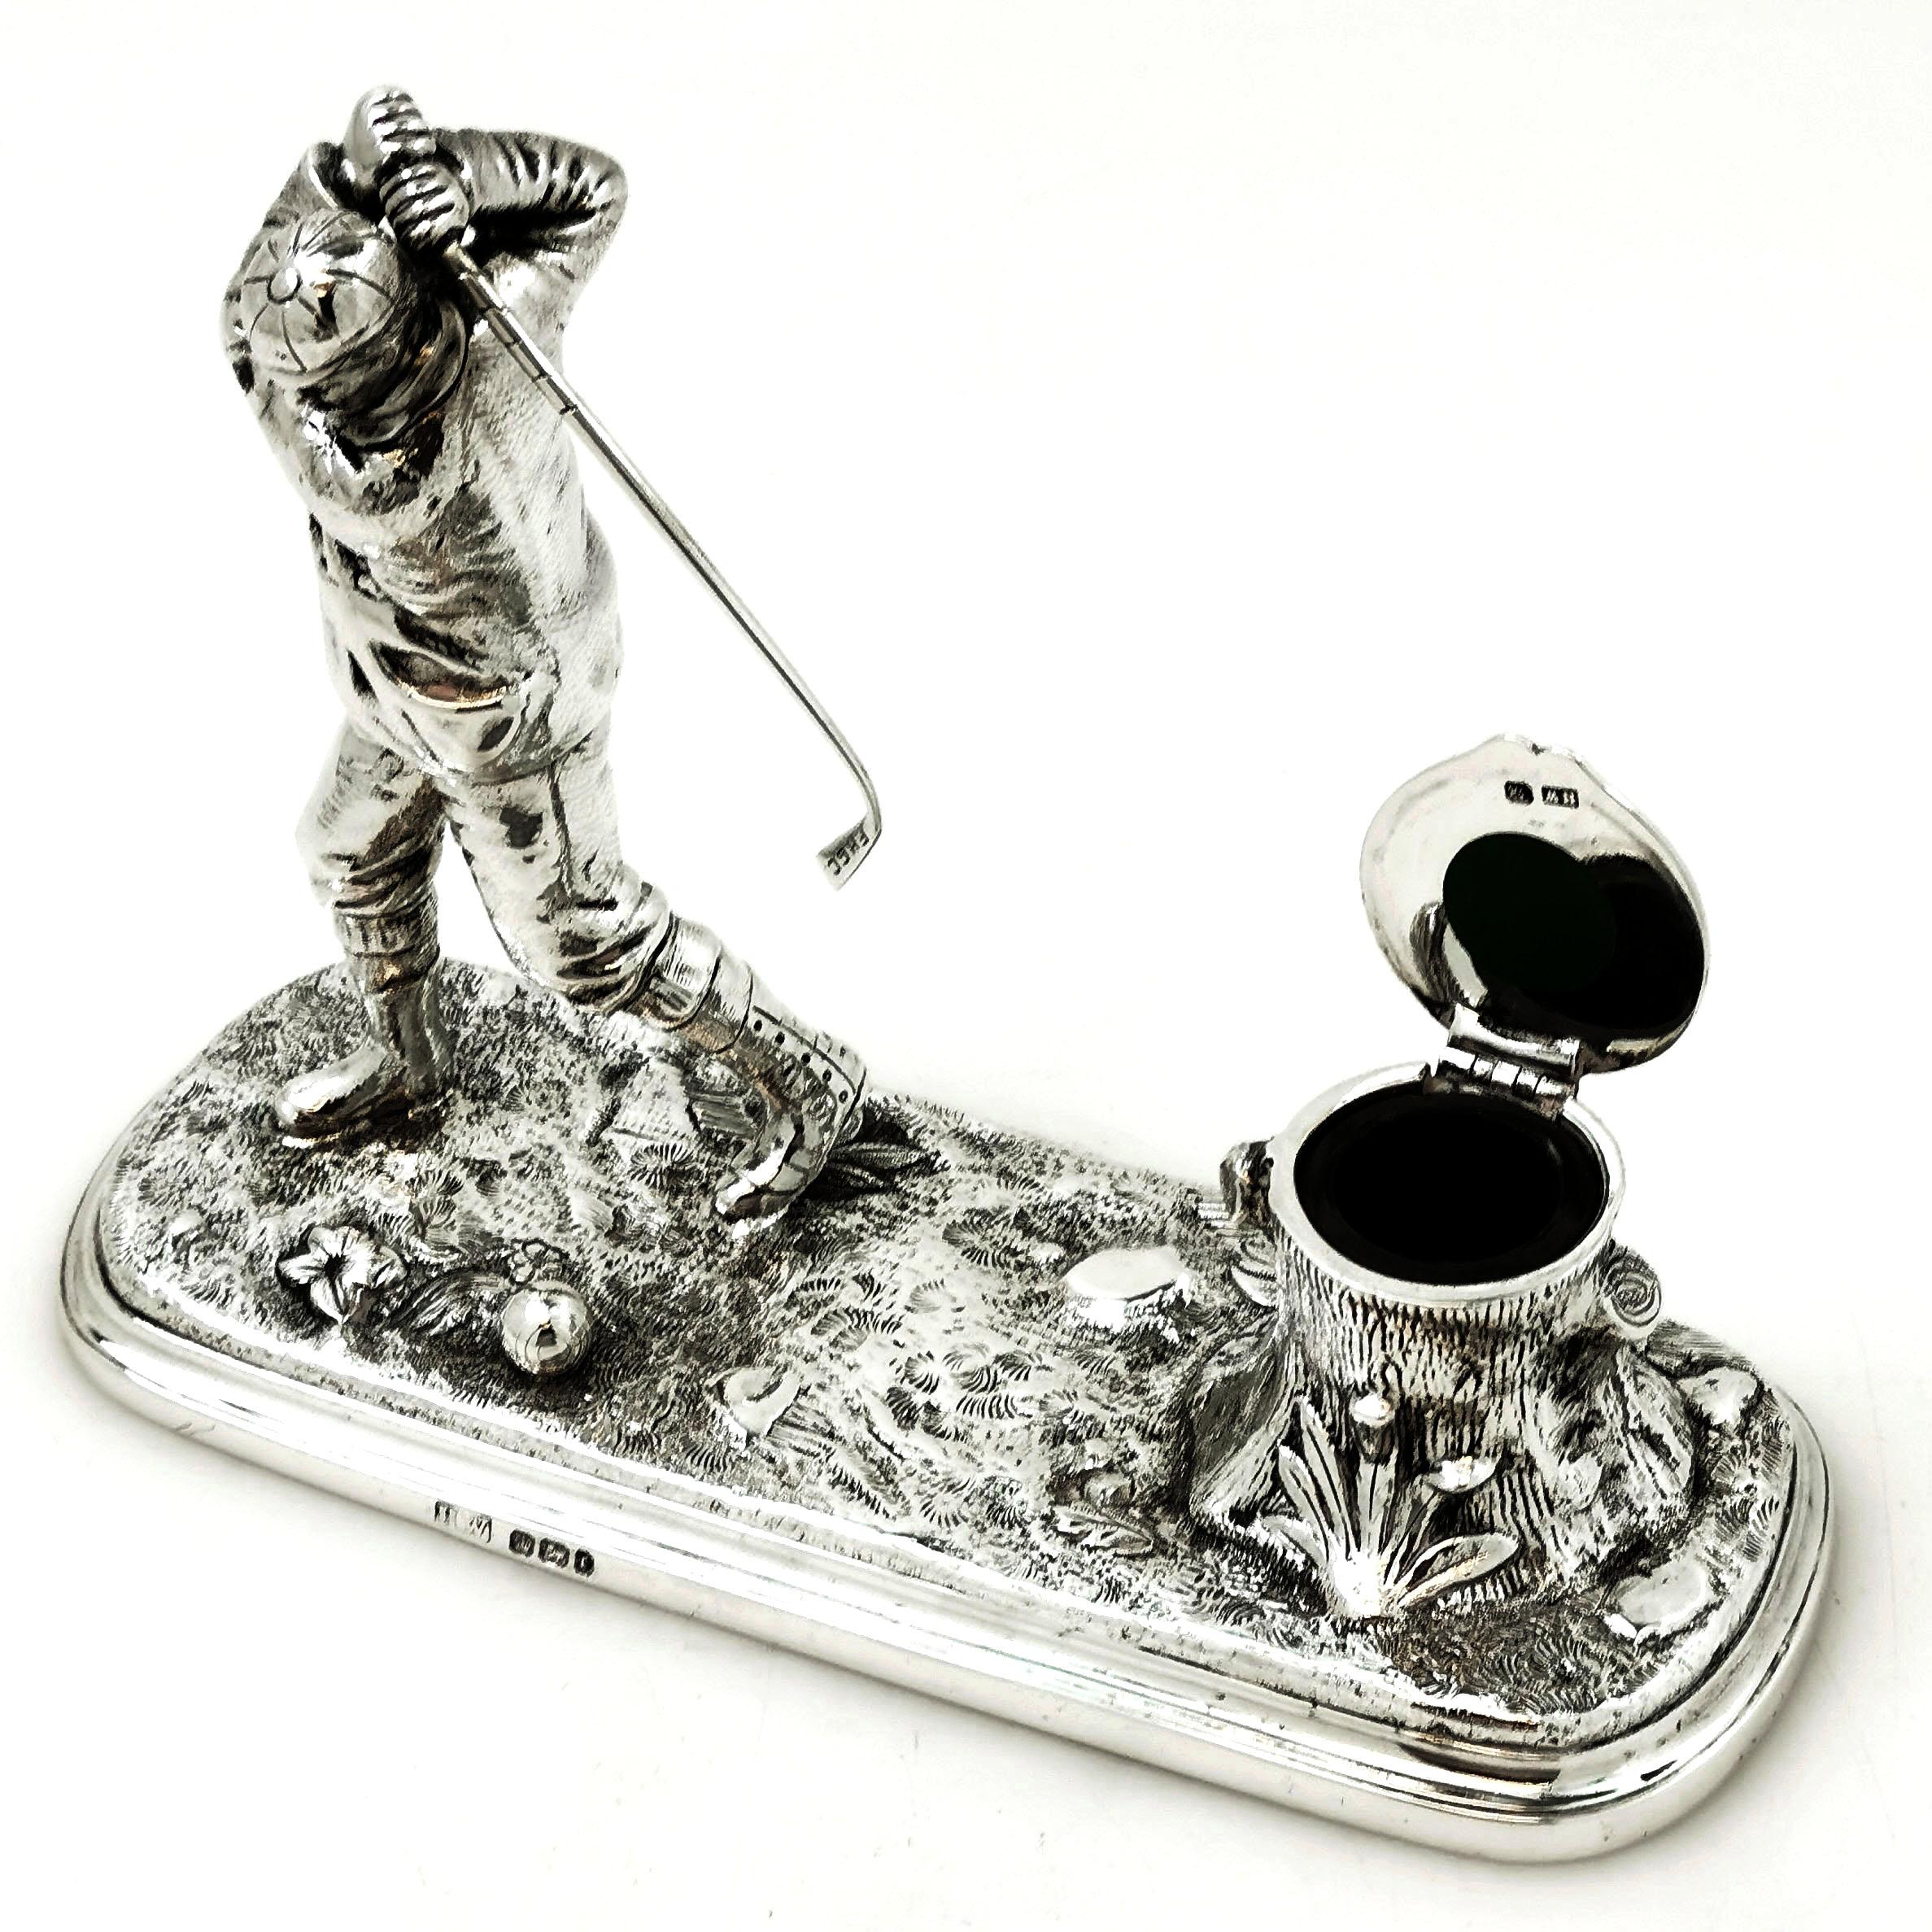 English Rare Antique Victorian Silver Golf Inkstand or Inkwell, 1895